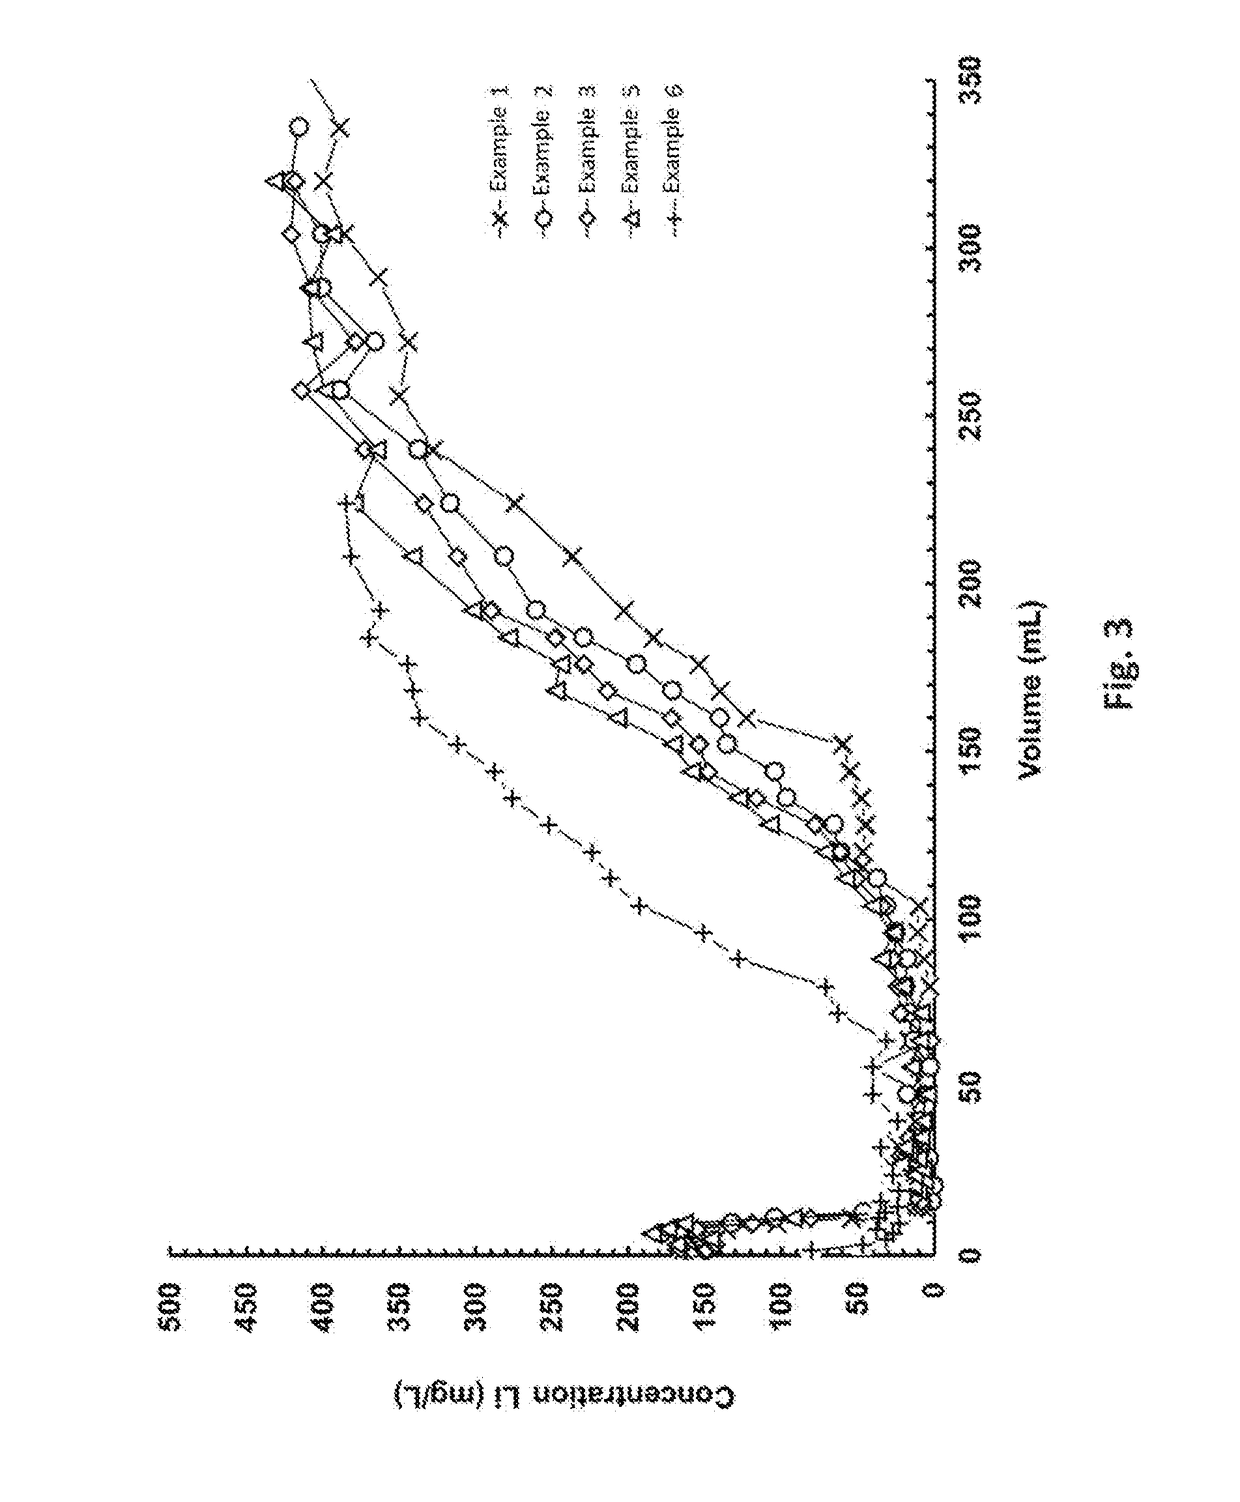 Method for preparing an adsorbent material comprising a step of basic mixing, and method for extracting lithium from saline solutions using said material